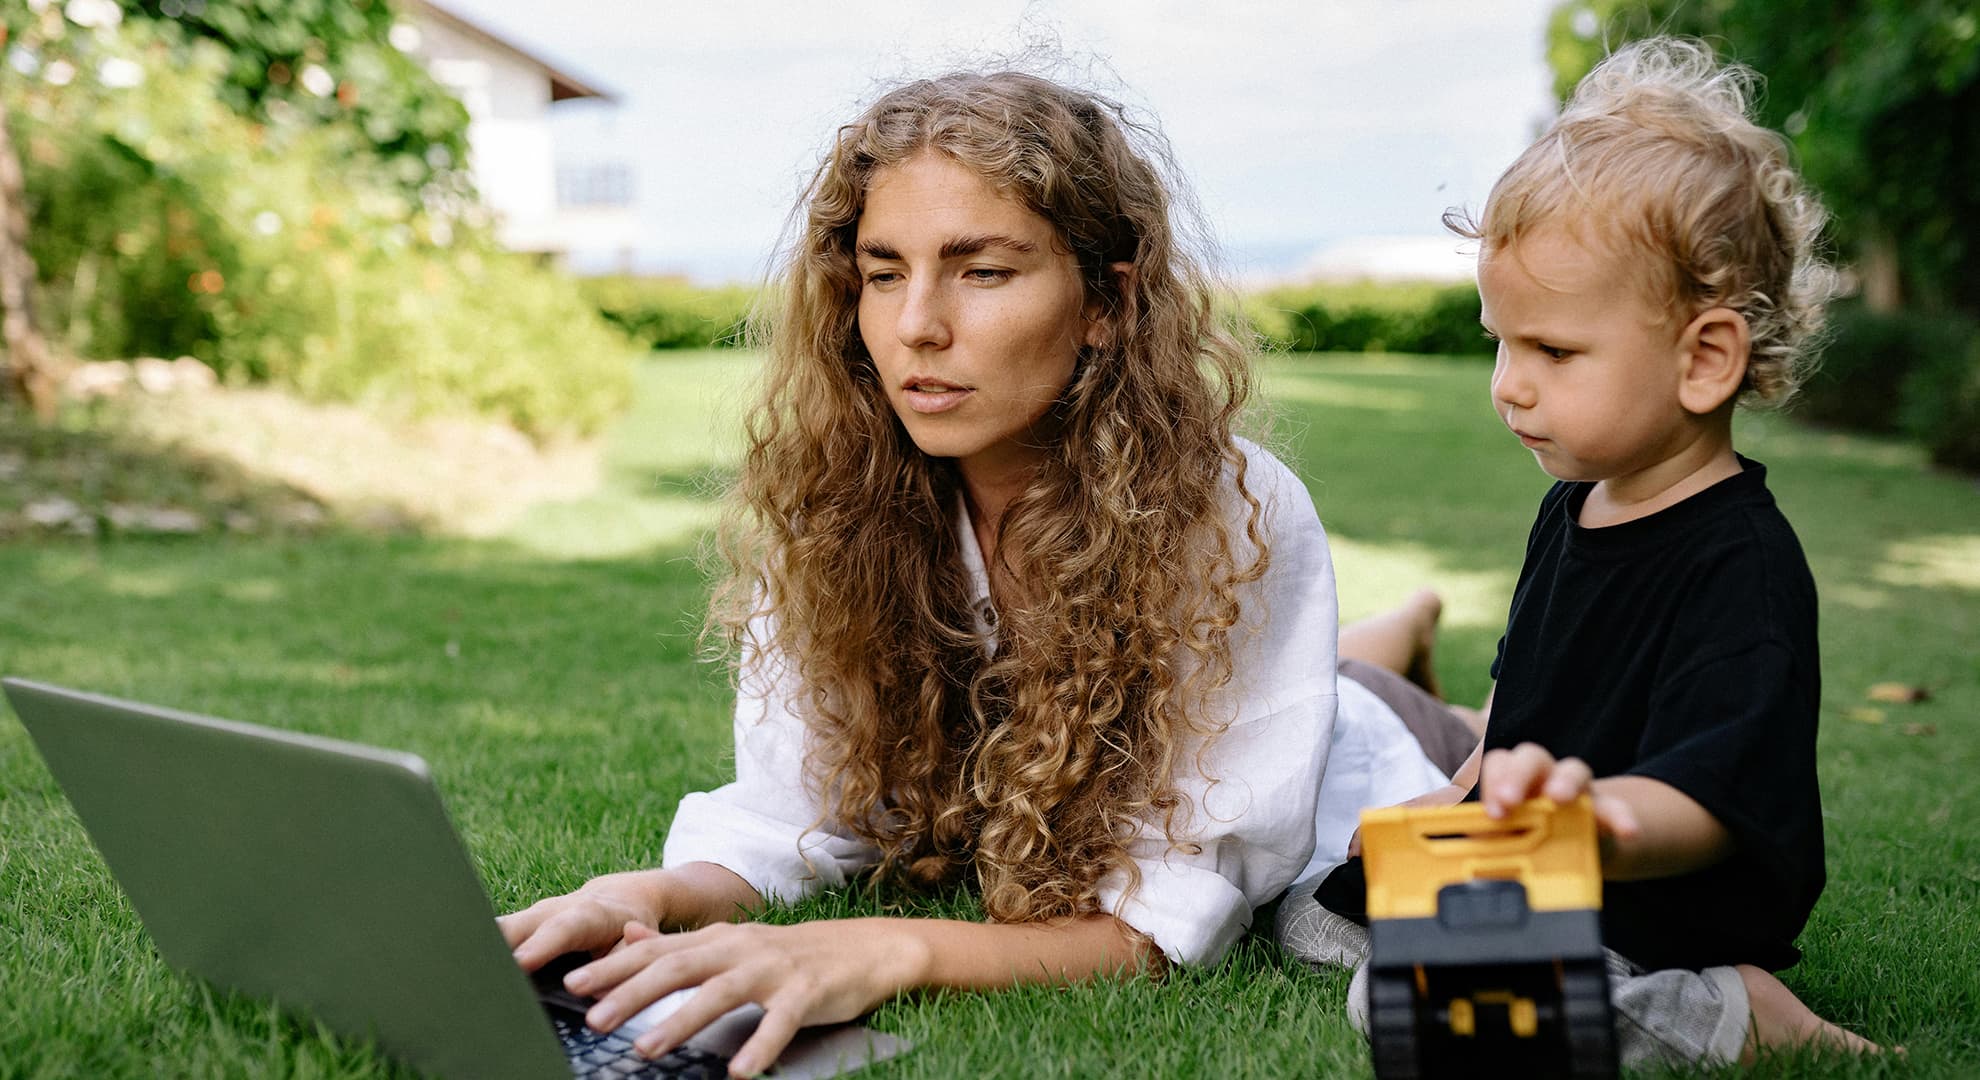 Woman lying on grass with computer and toddler.